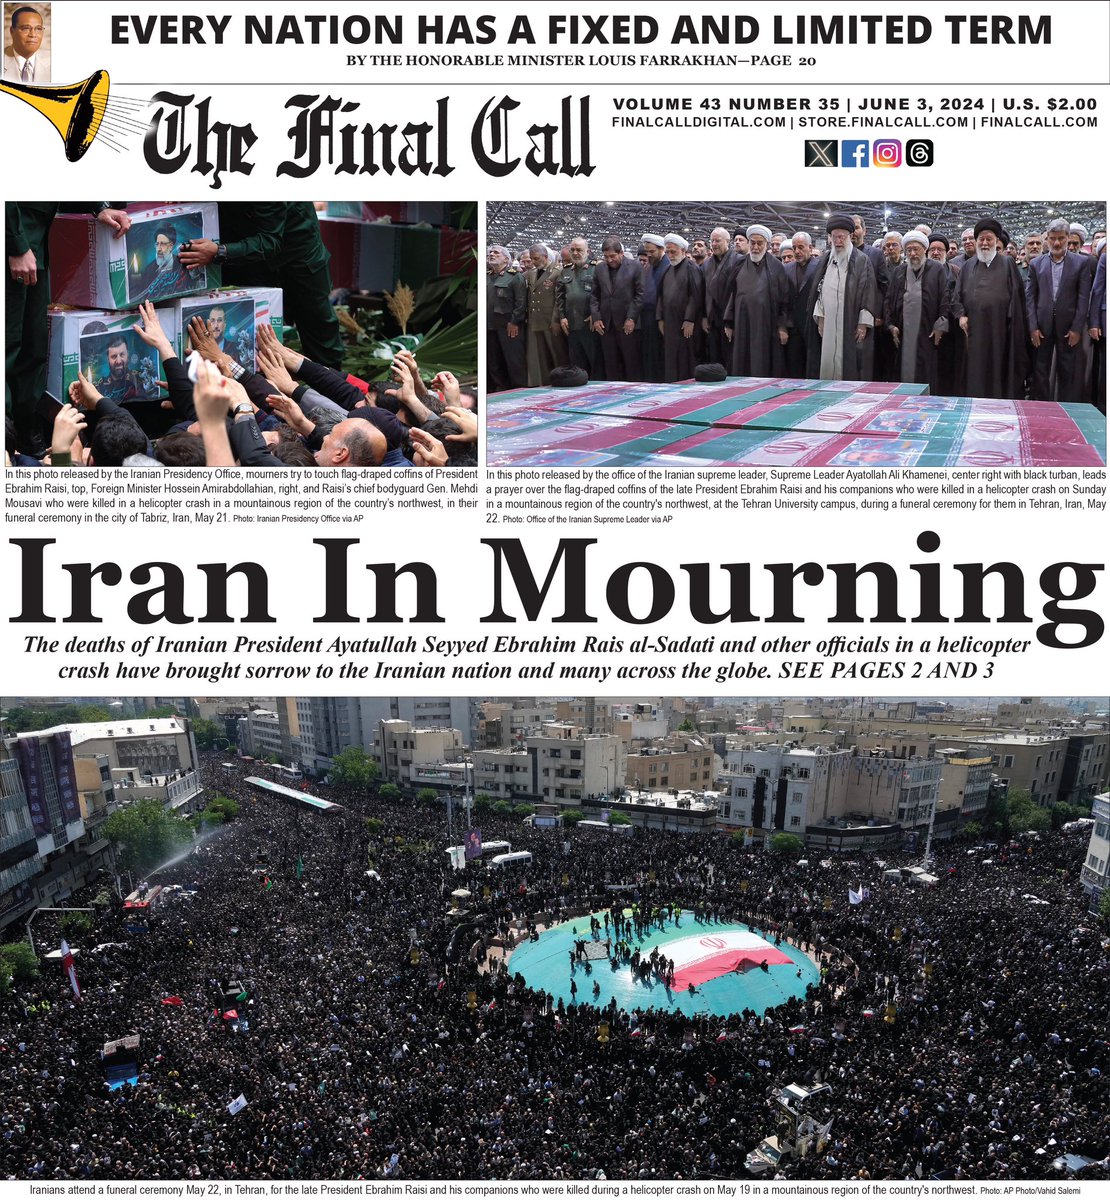 New Edition ::: Iran In Mourning The deaths of Iranian President Ayatullah Seyyed Ebrahim Rais al-Sadati and other officials in a helicopter crash have brought sorrow to the Iranian nation and many across the globe. Subscribe to finalcalldigital.com